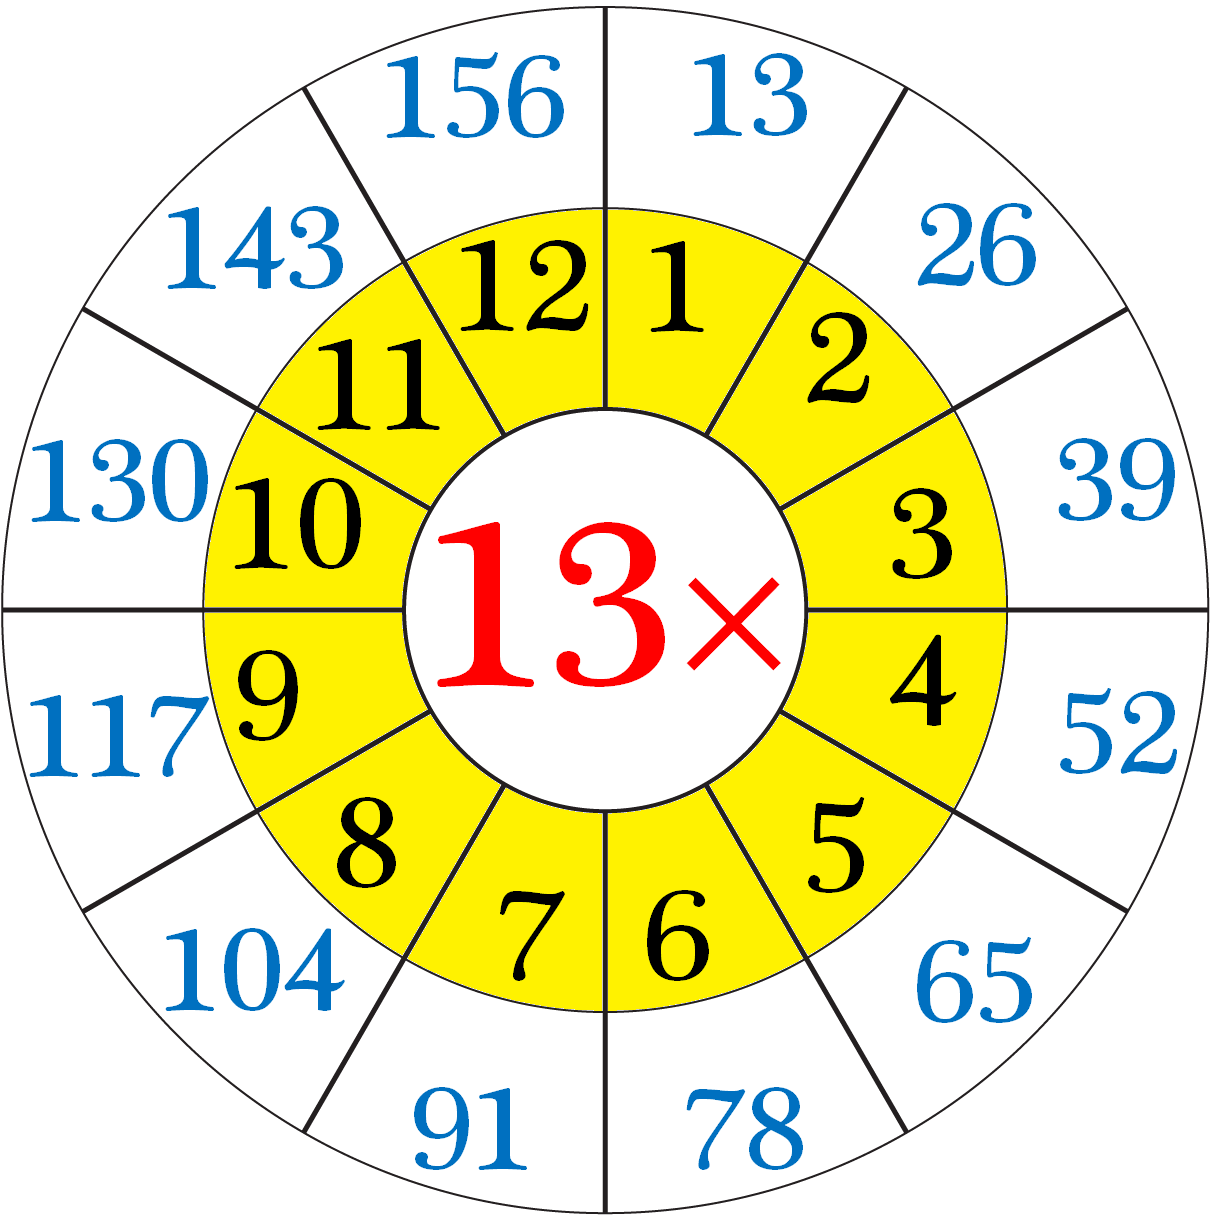 multiplication-table-of-13-read-and-write-the-table-of-13-thirteen